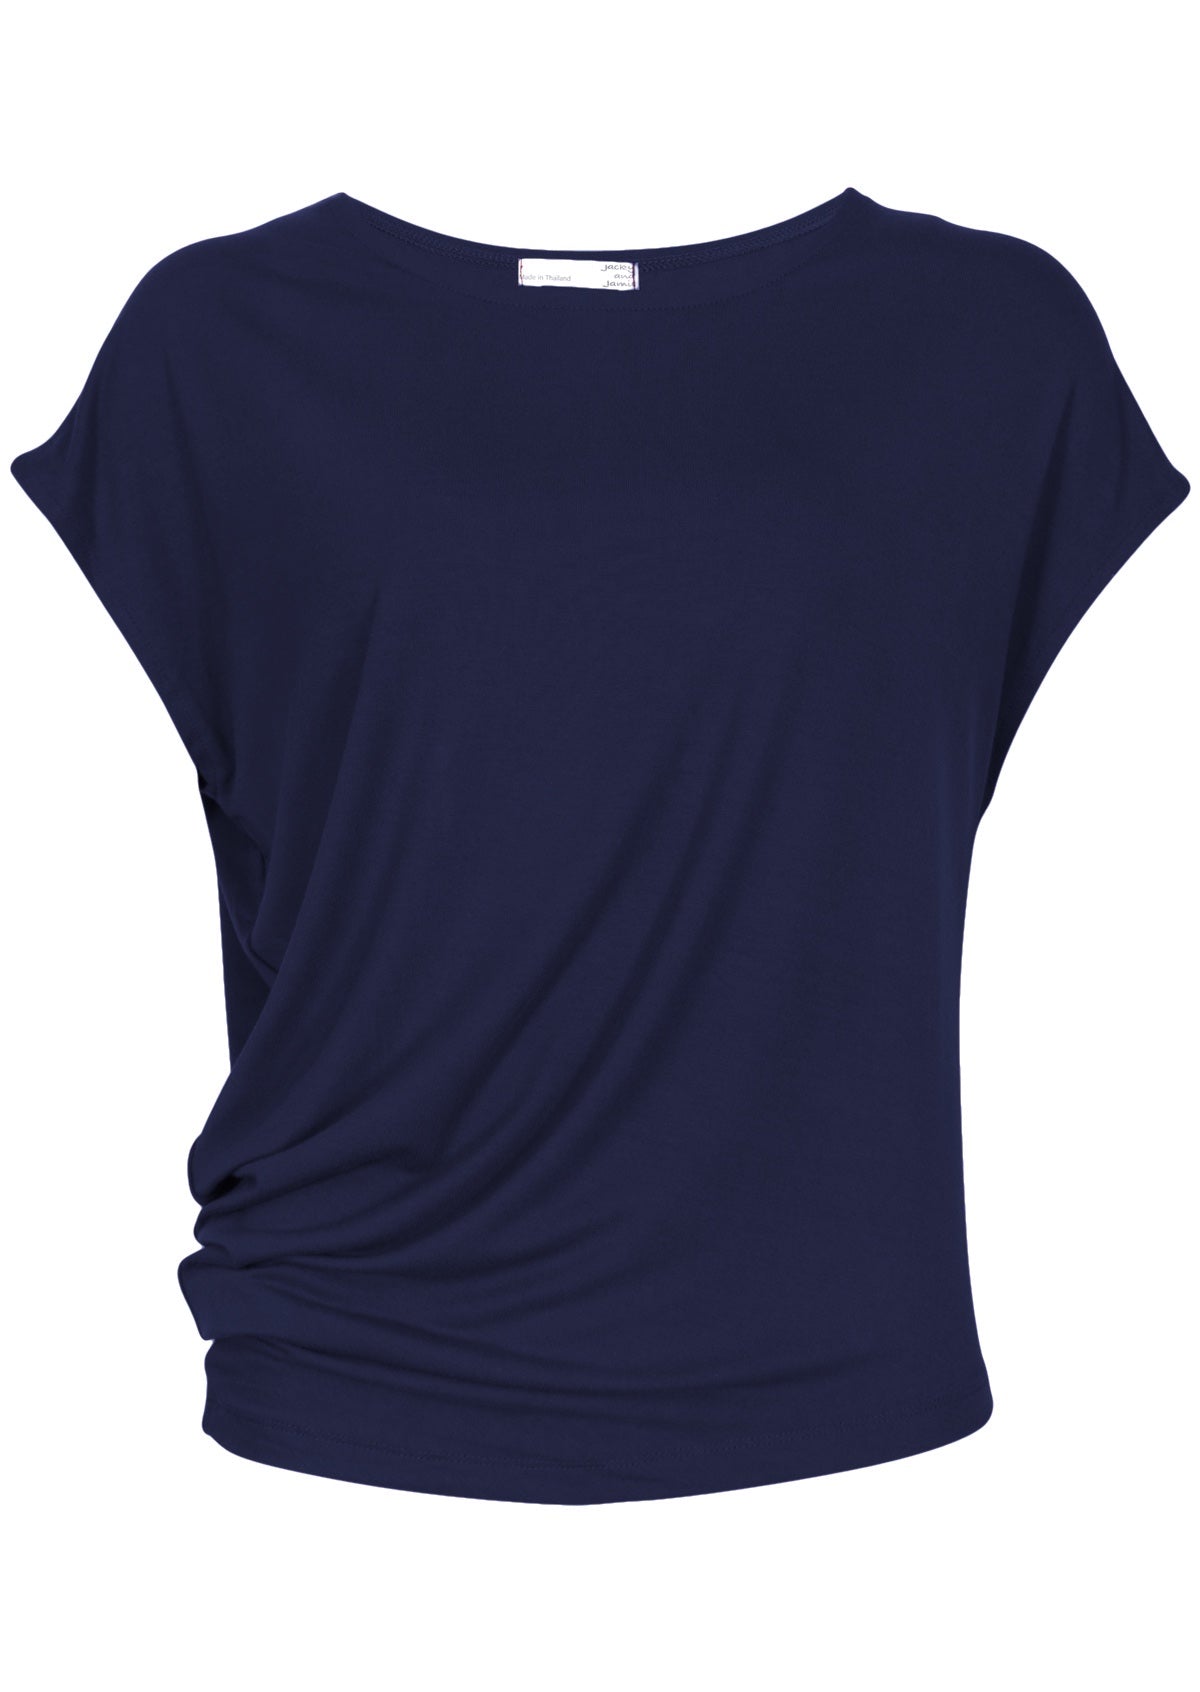 Short sleeve women's navy blue top with asymmetrical detail creating gathering at the side